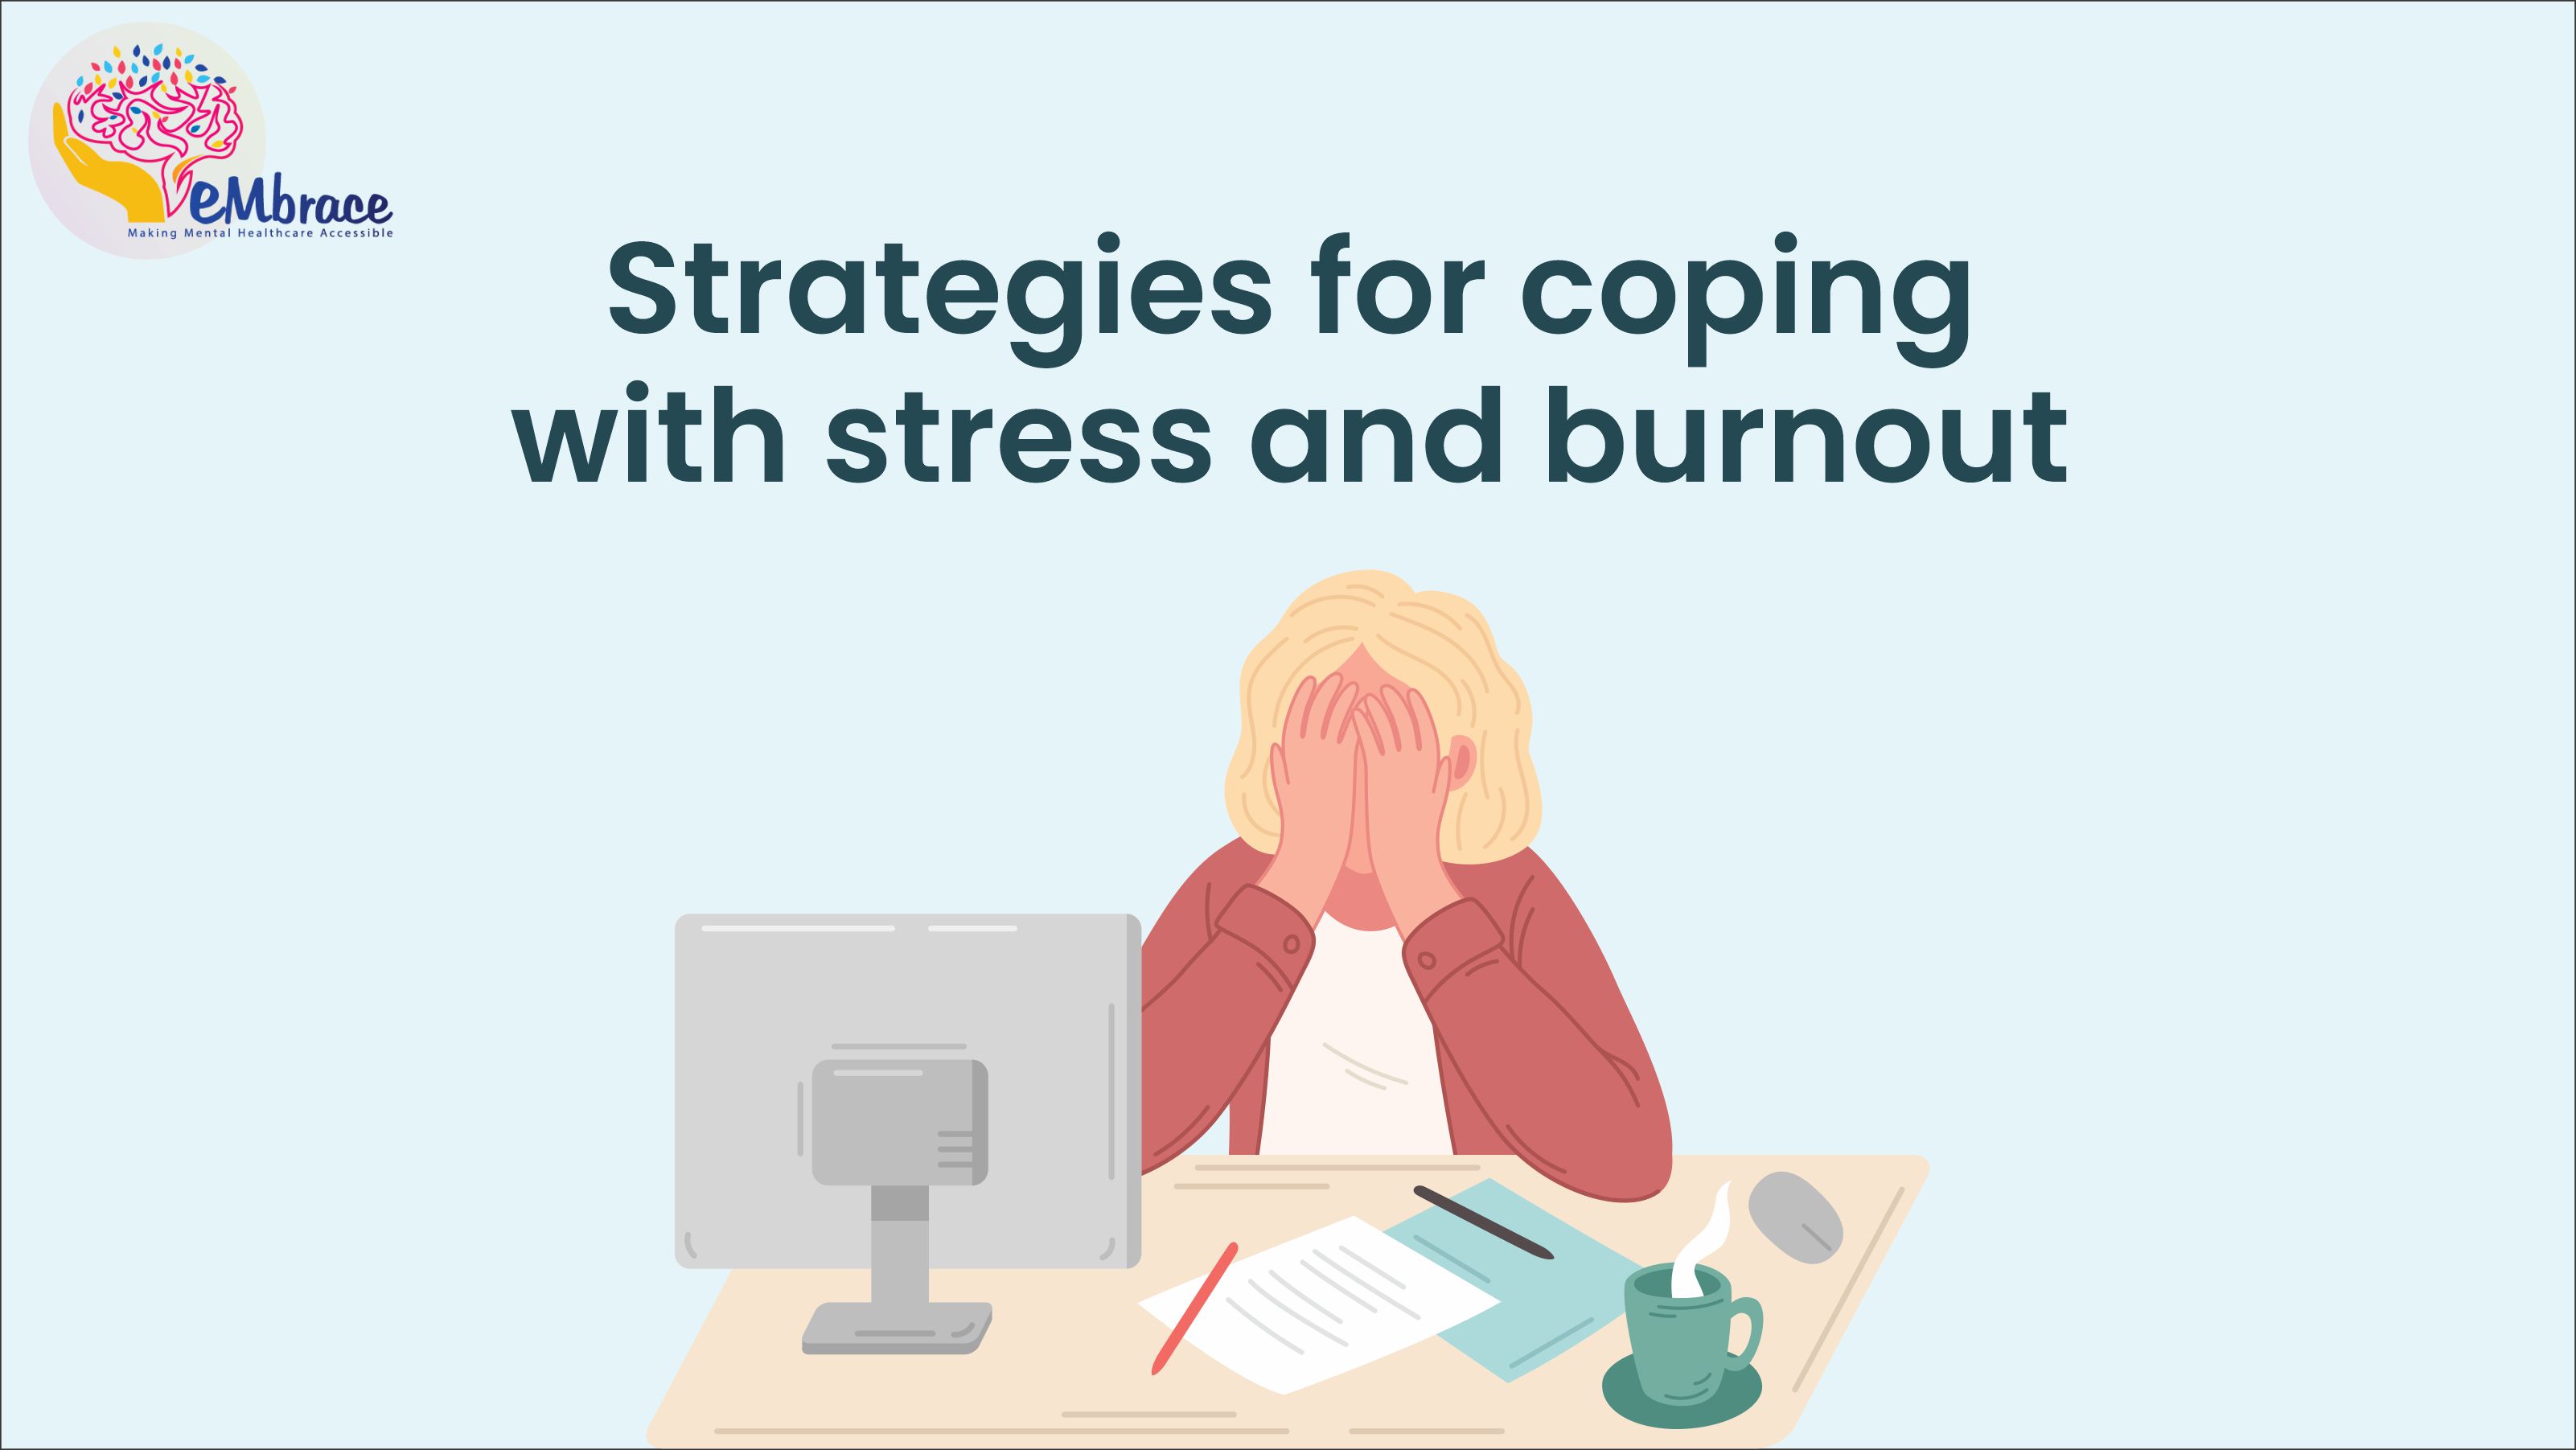 Strategies for coping with stress and burnout